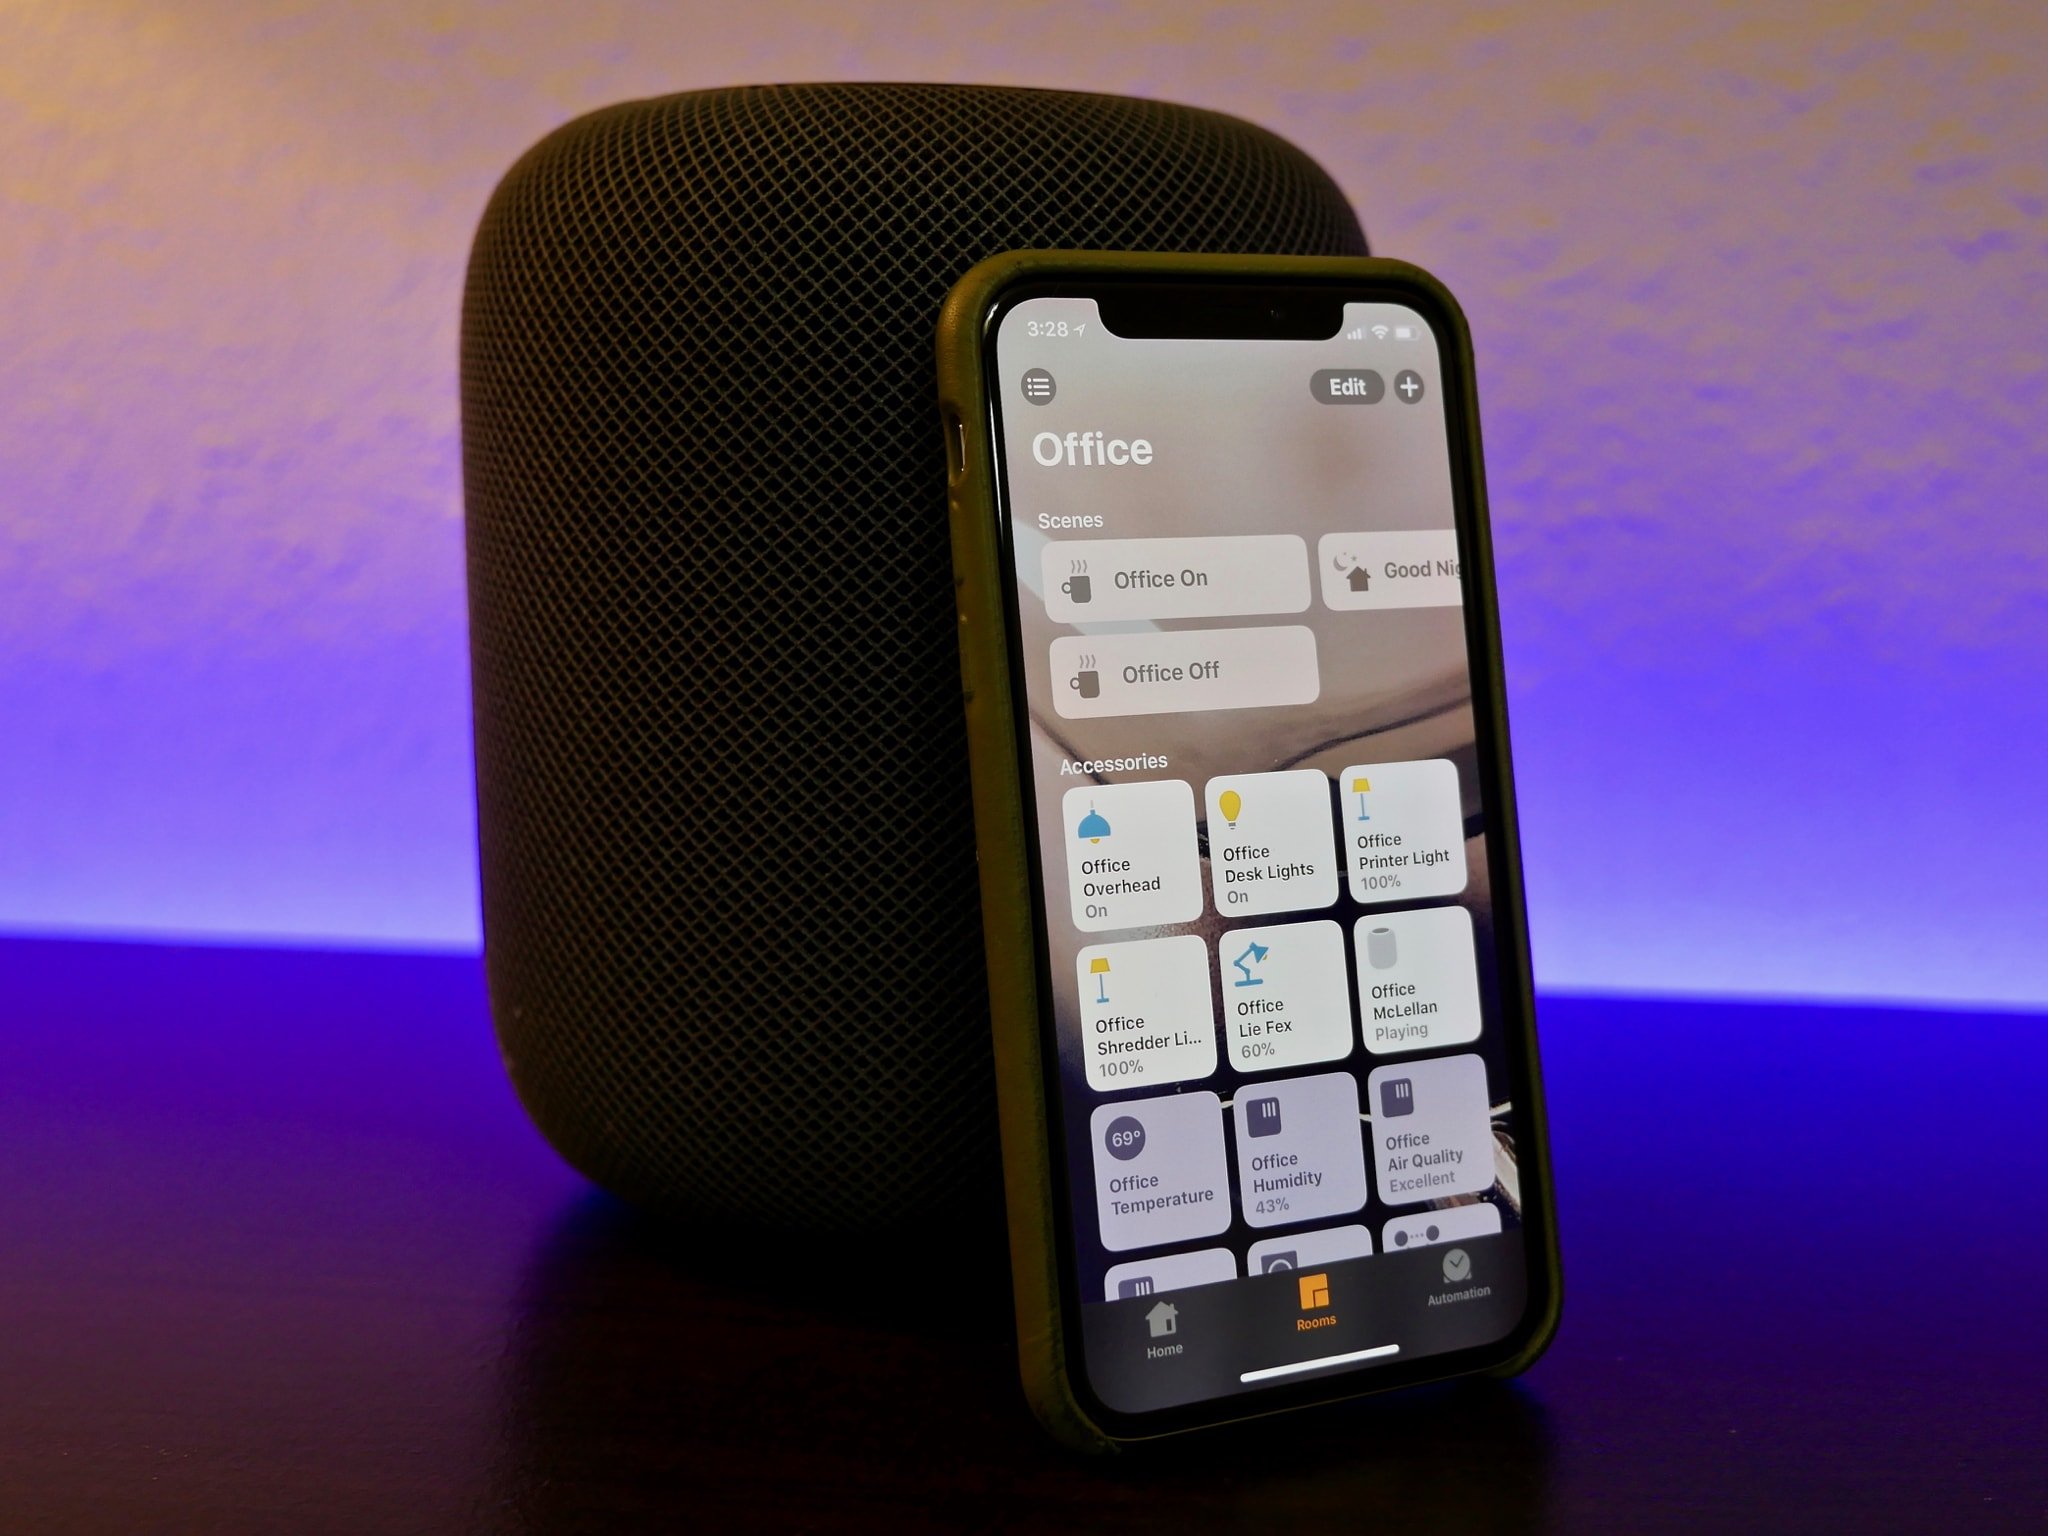 An iPhone X sits in front of a HomePod. The Home app for iOS is open on screen.